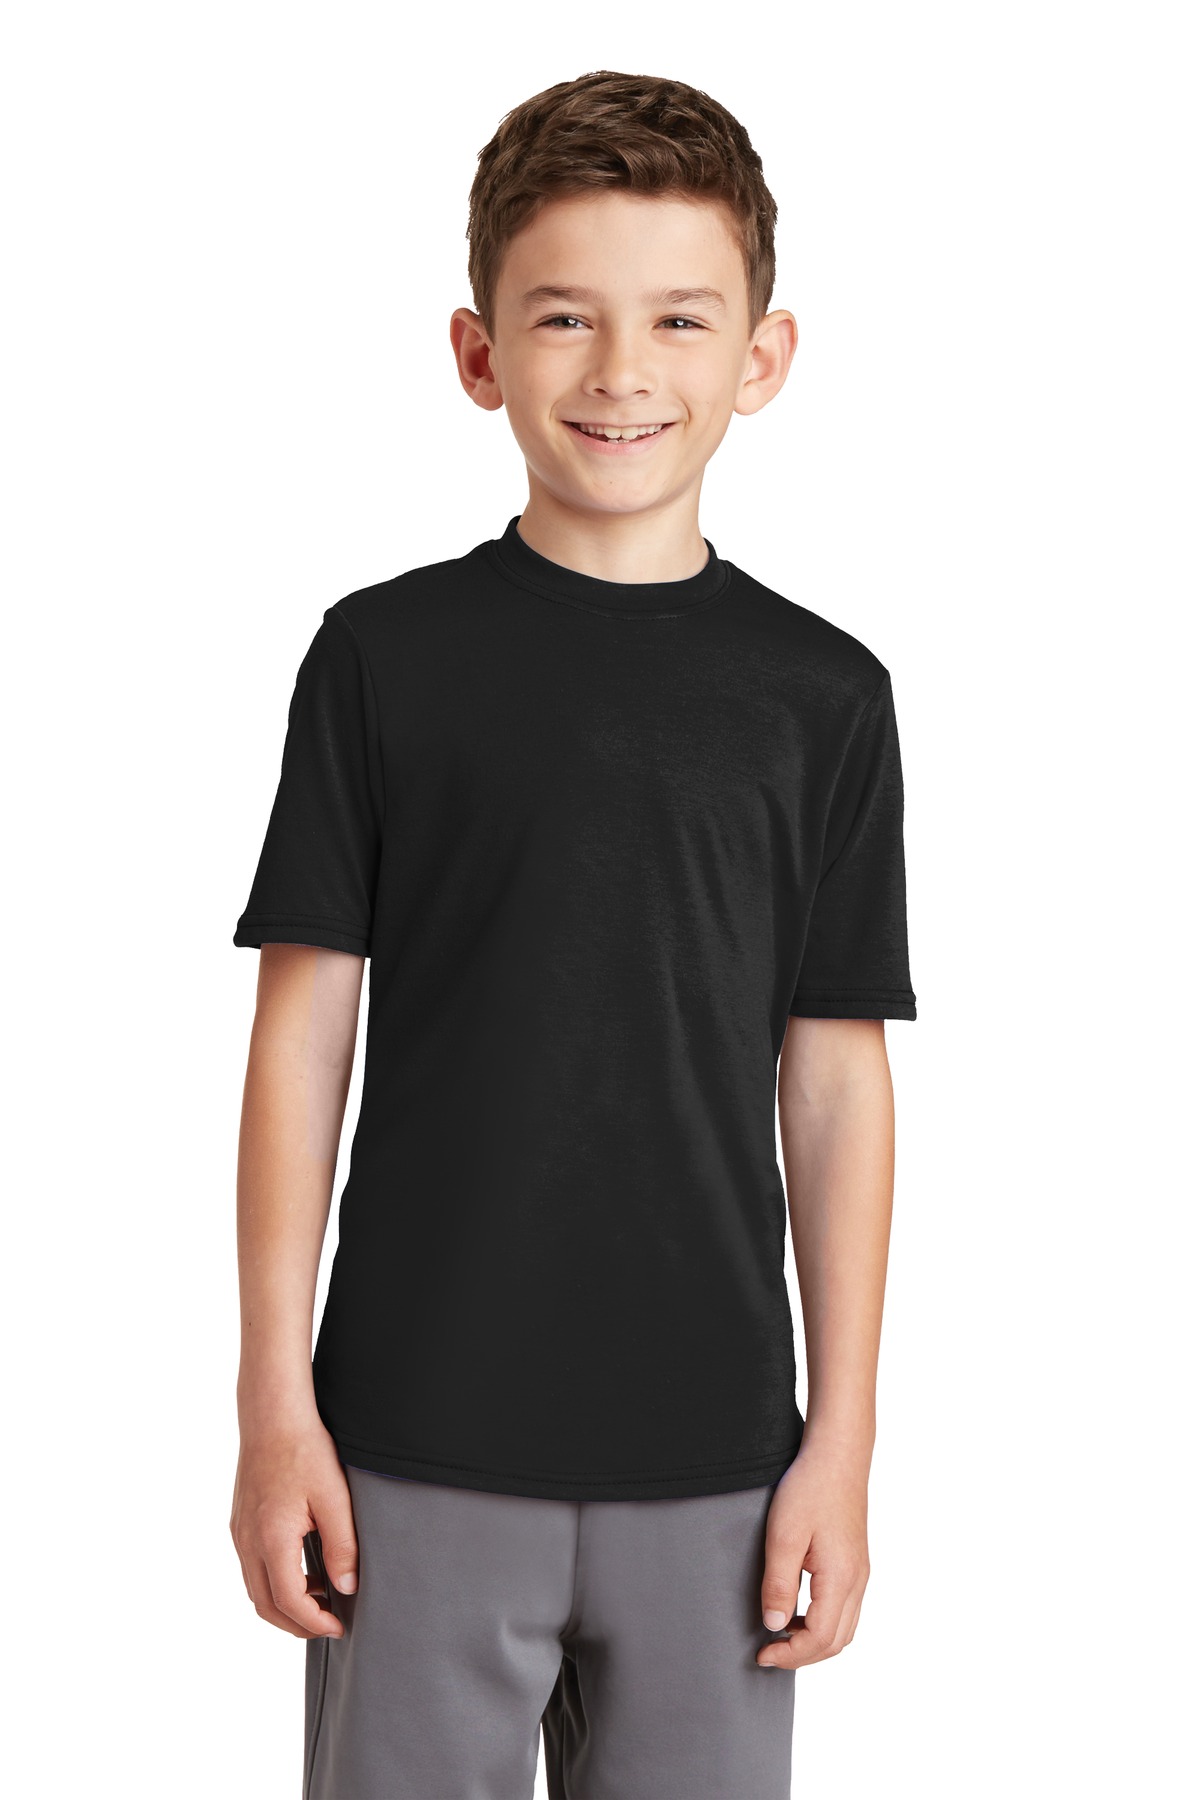 Port & Company  PC381Y - Youth Essential Blended Performance Tee